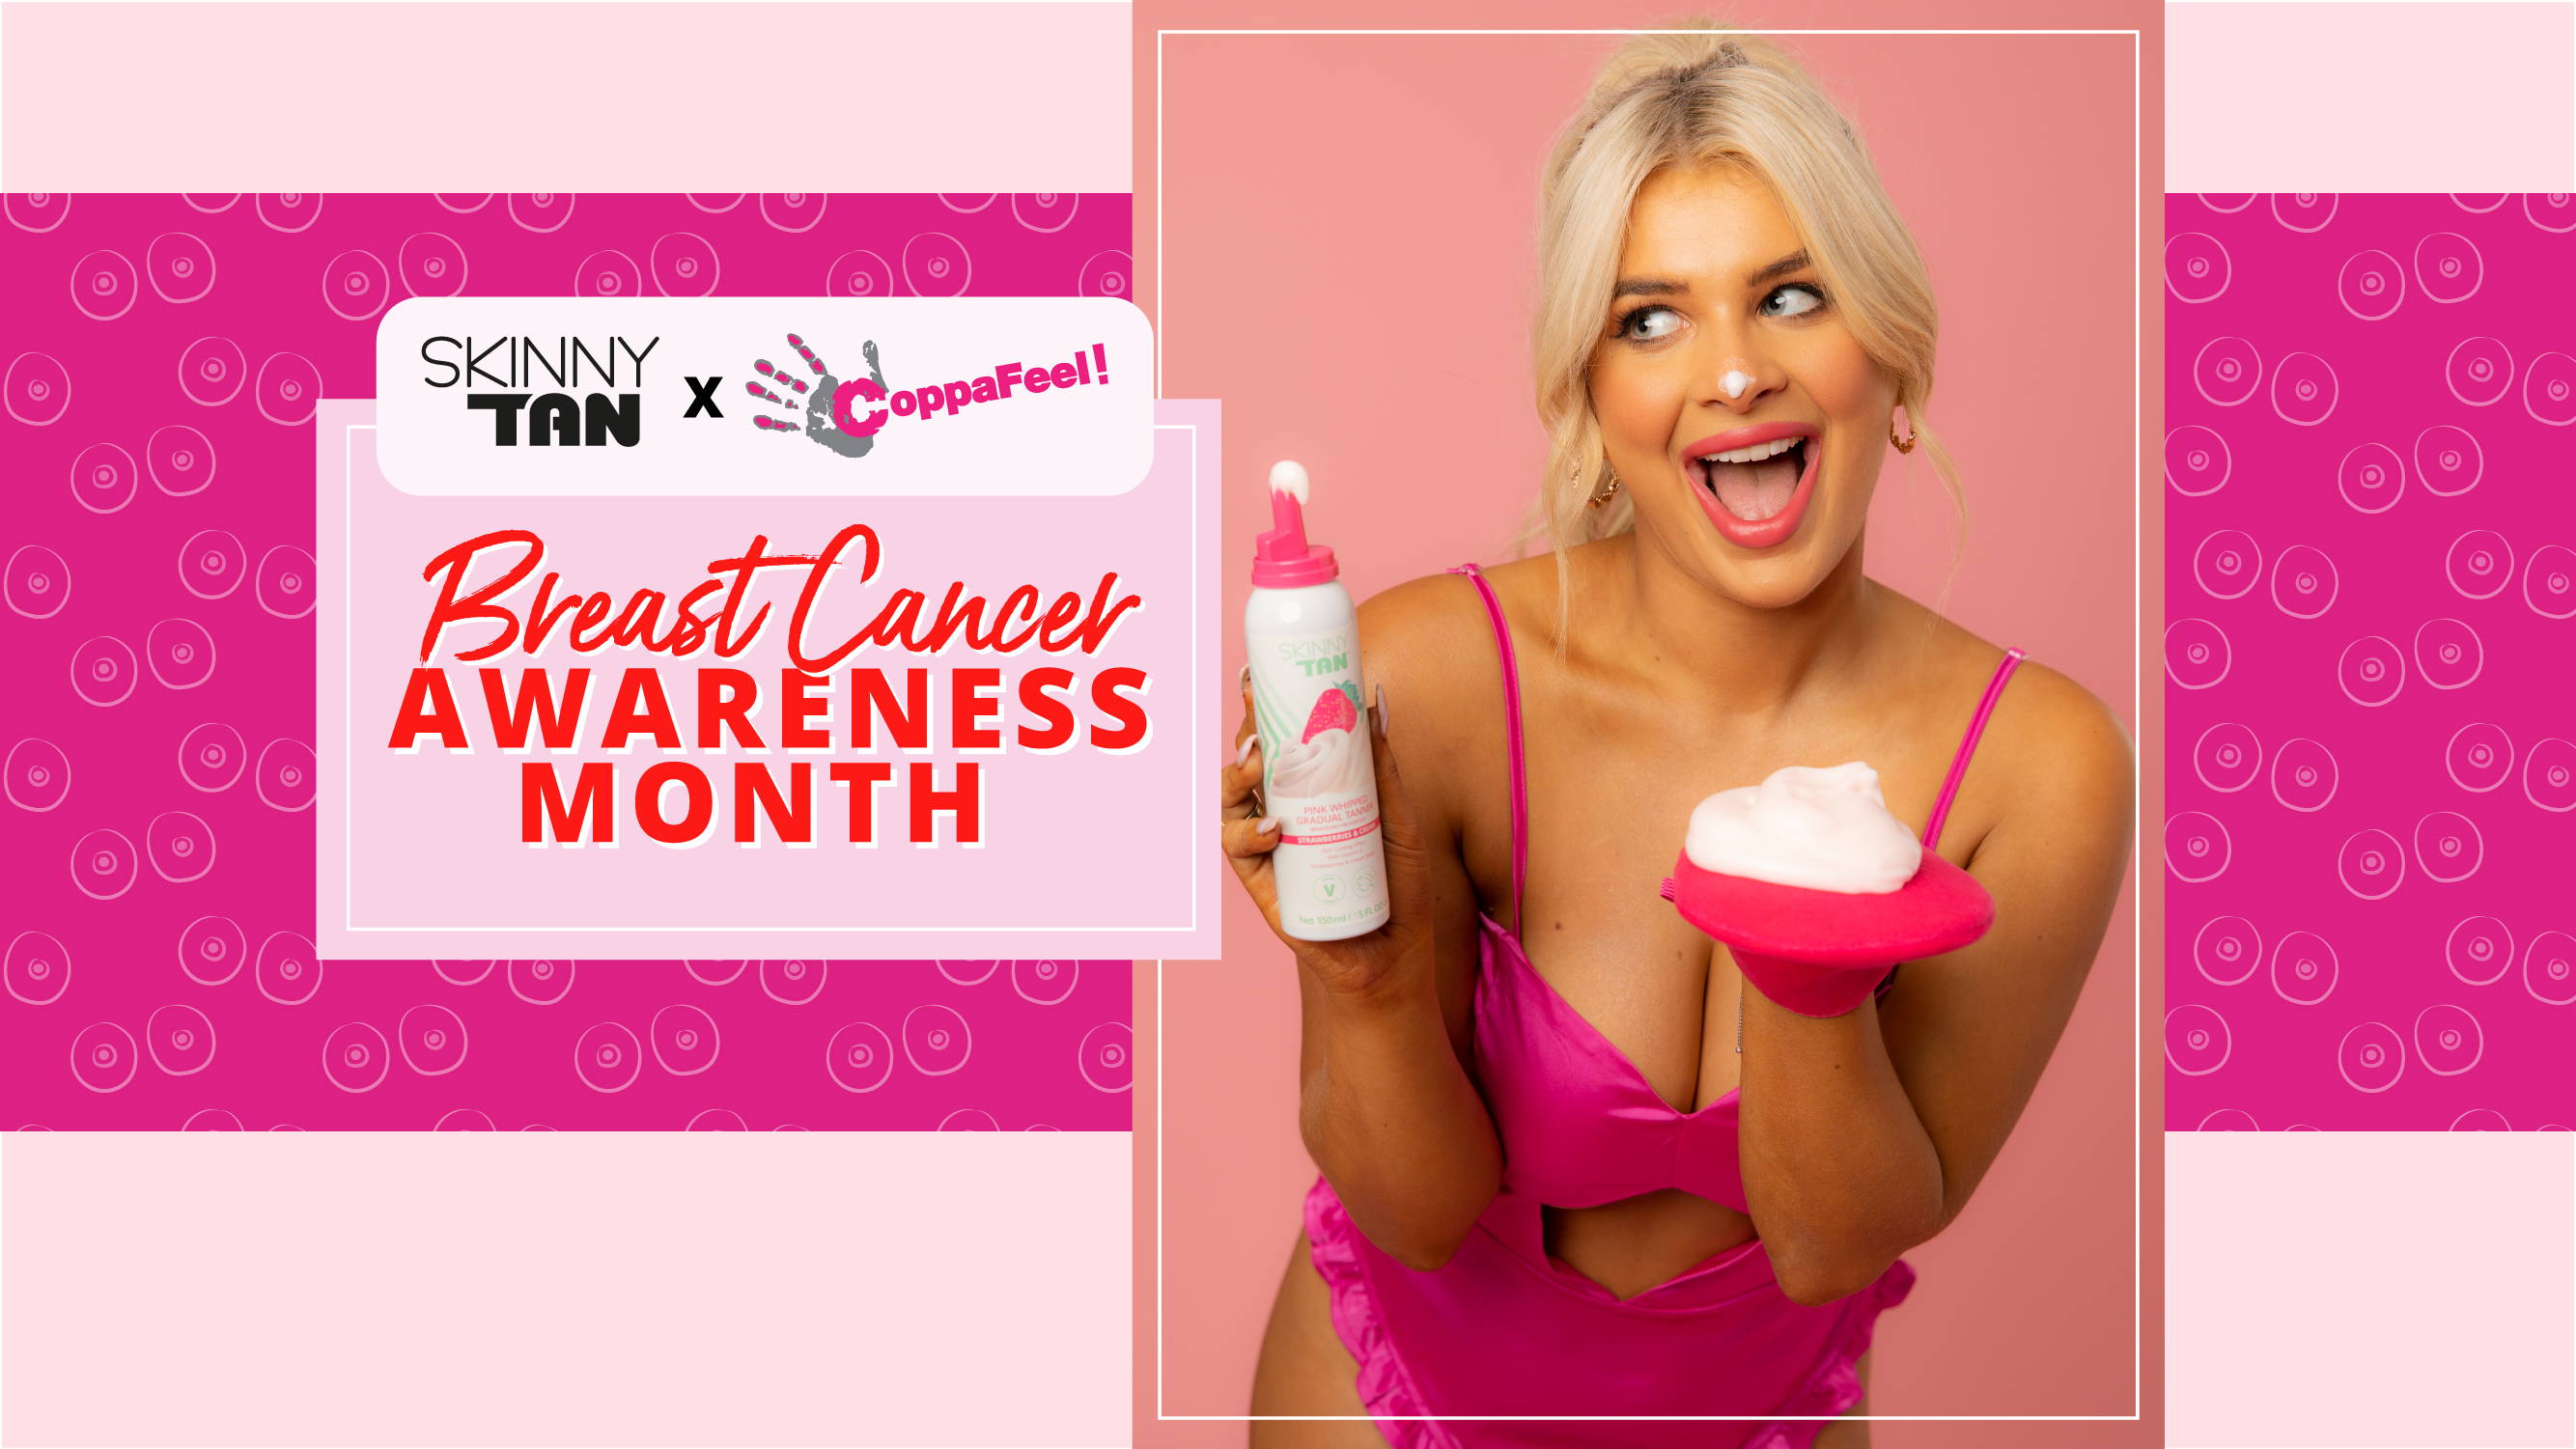 4 Ways To Support CoppaFeel! This Breast Cancer Awareness Month